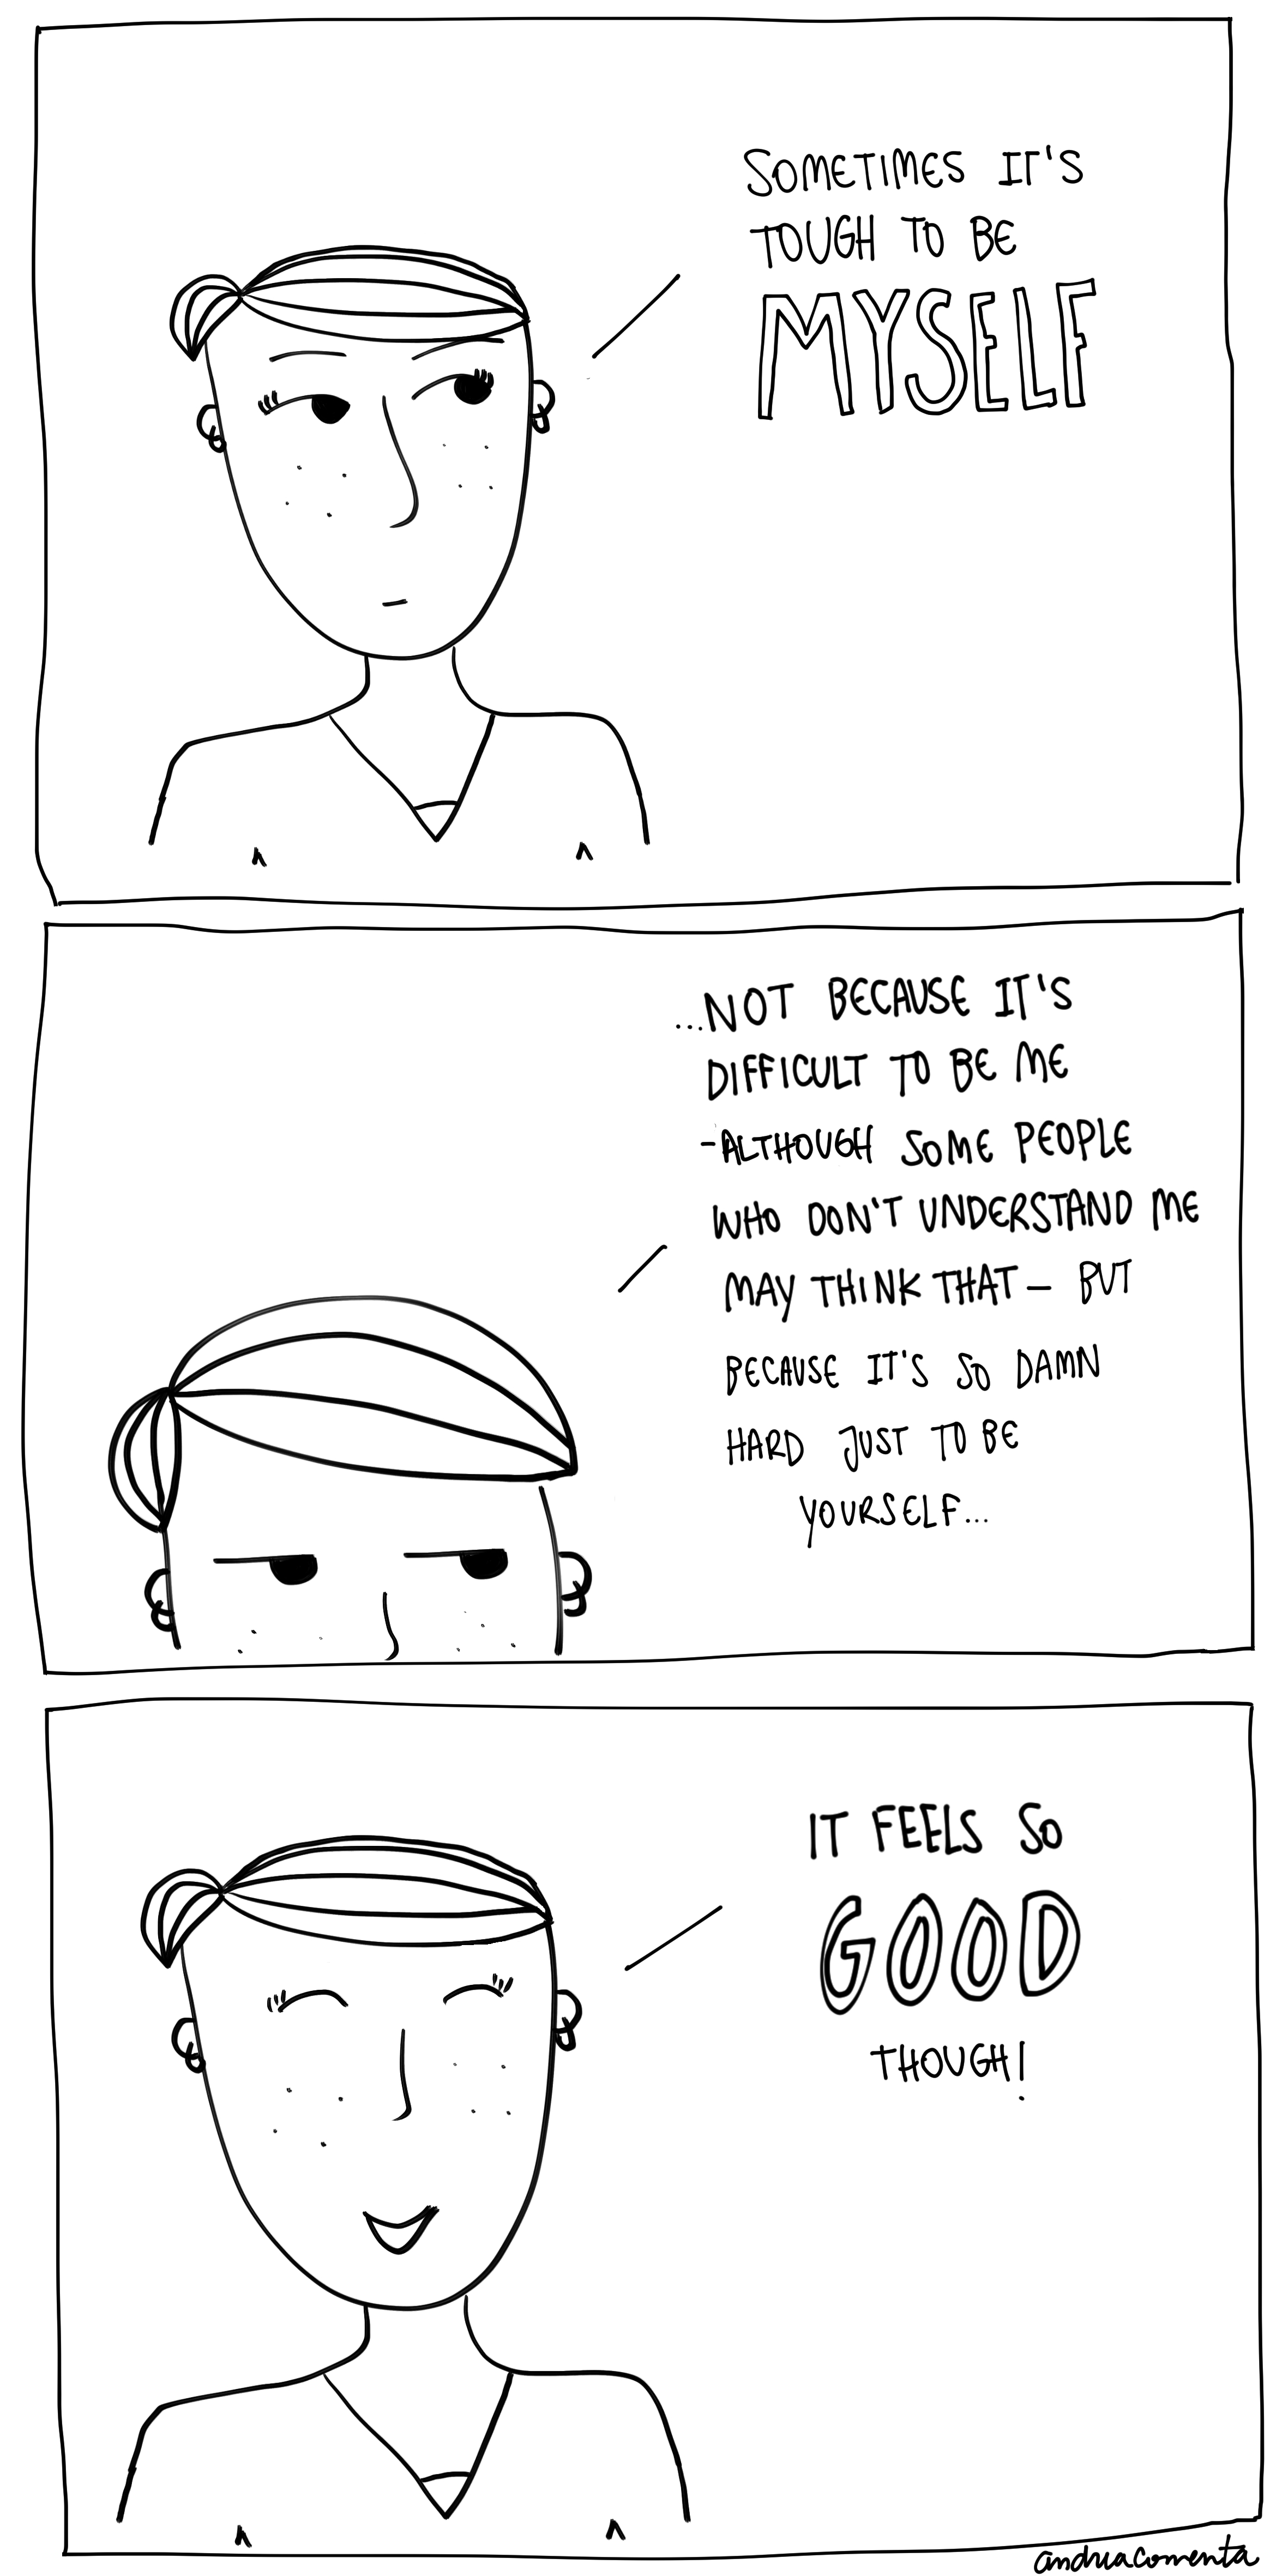 2014-11-10 comic to be myself completely